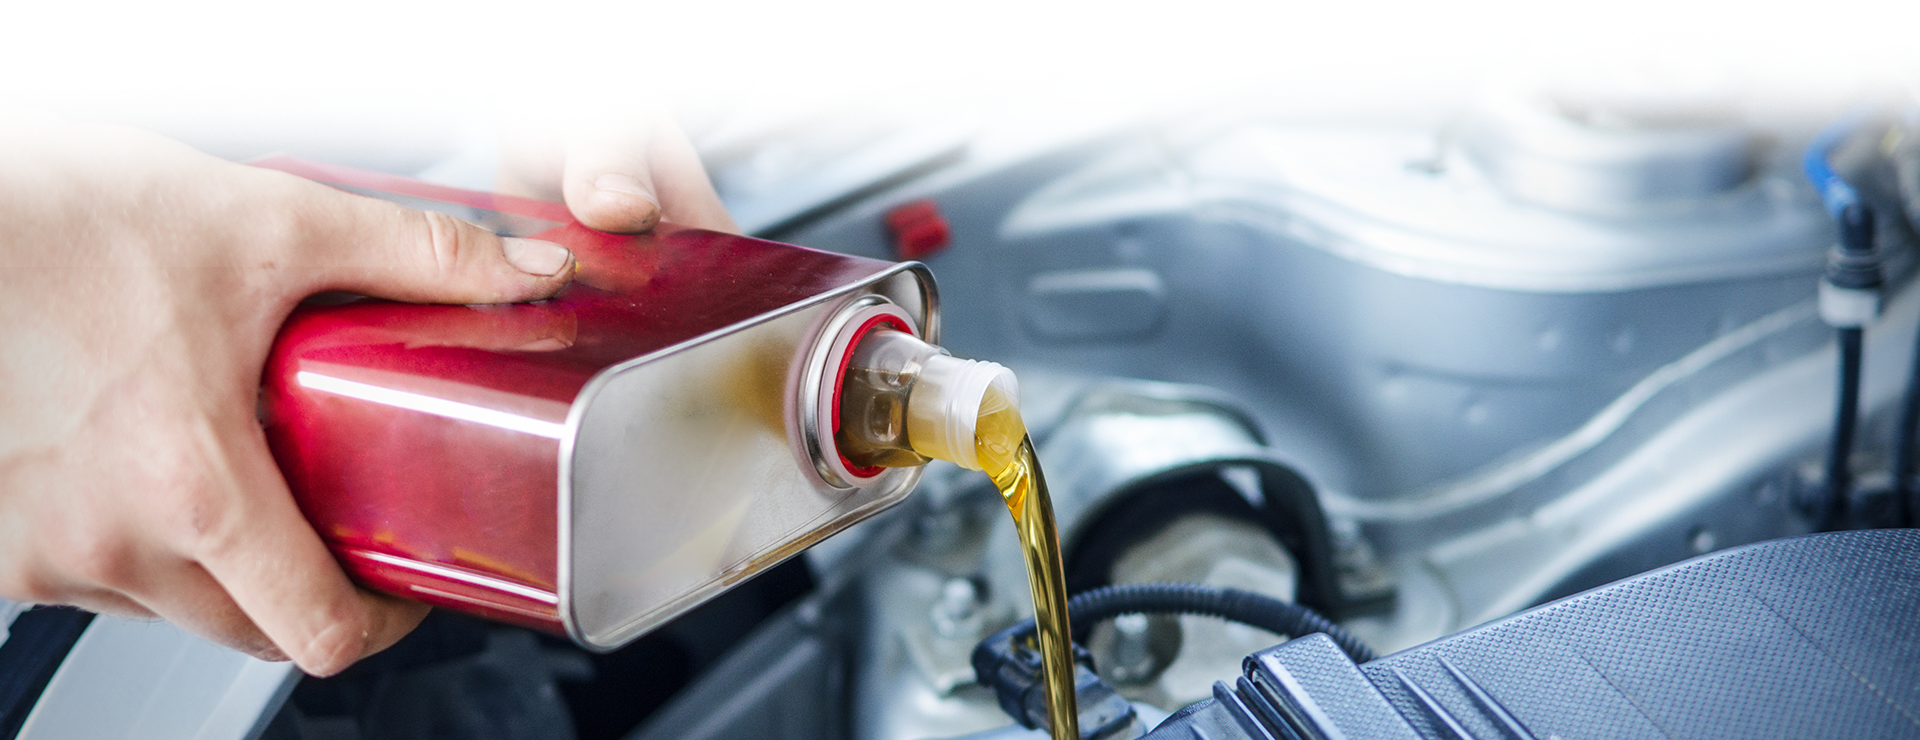 Expert Car Oil Change Service Near Me for Smooth-Running Engine